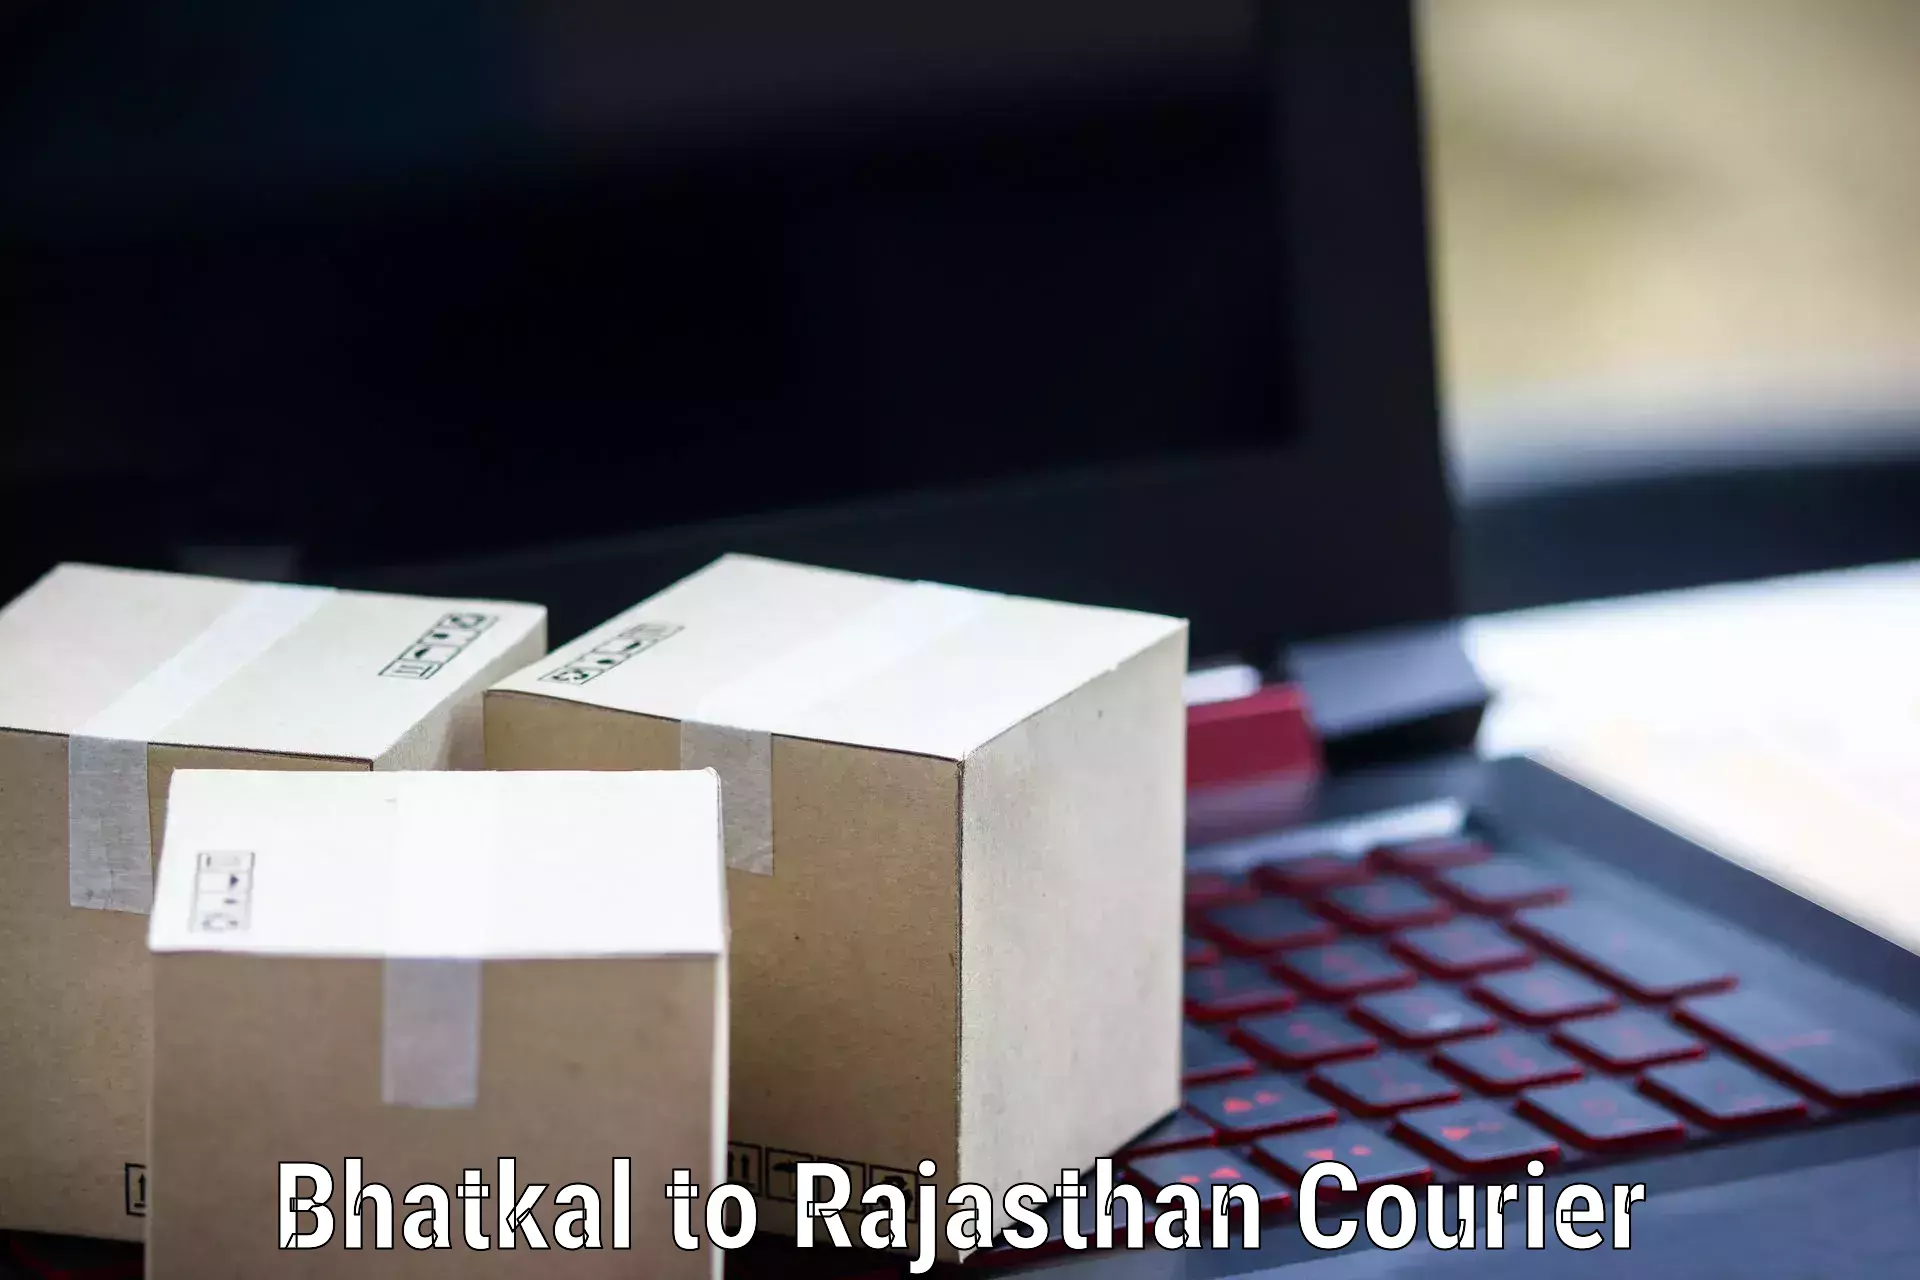 Reliable package handling Bhatkal to Nagar